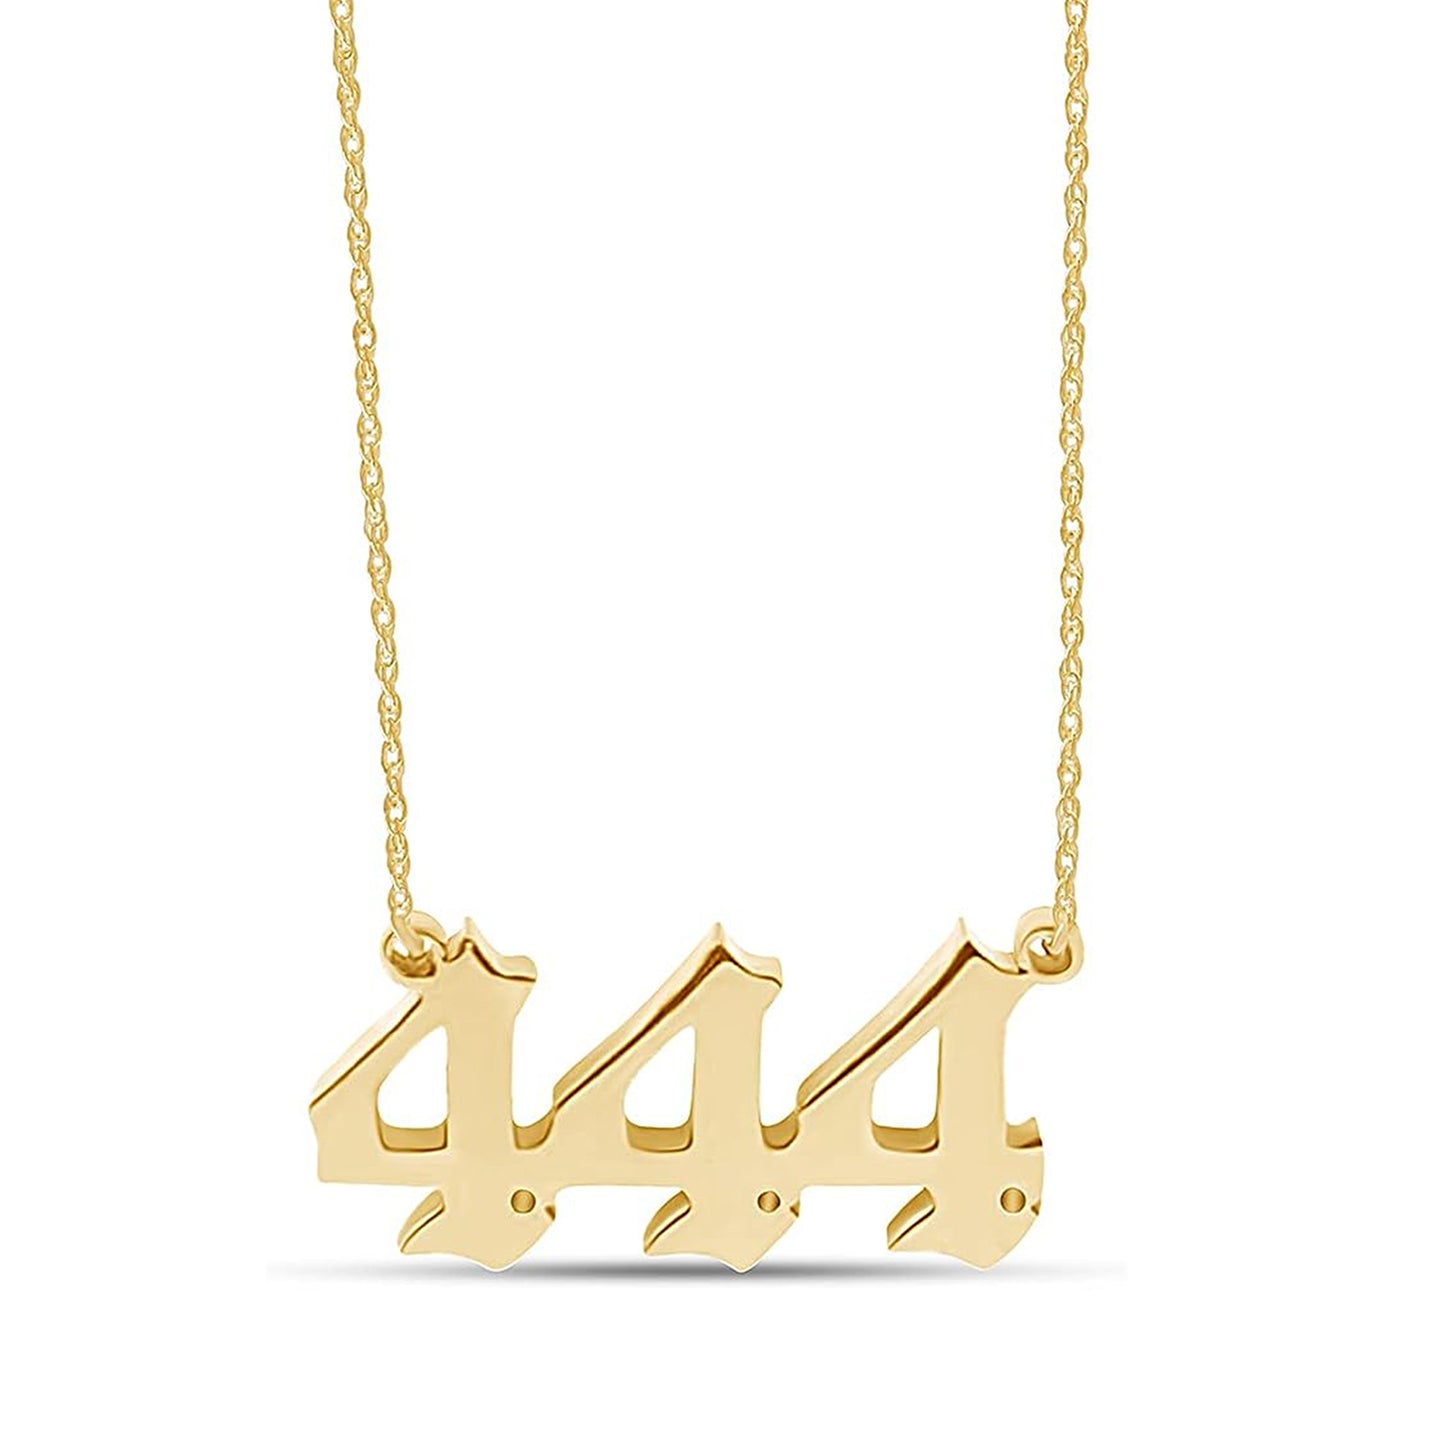 Angel Number 111 222 333 444 555 666 777 888 999 Numerology Pendant Necklace In 14K Gold Over Sterling Silver